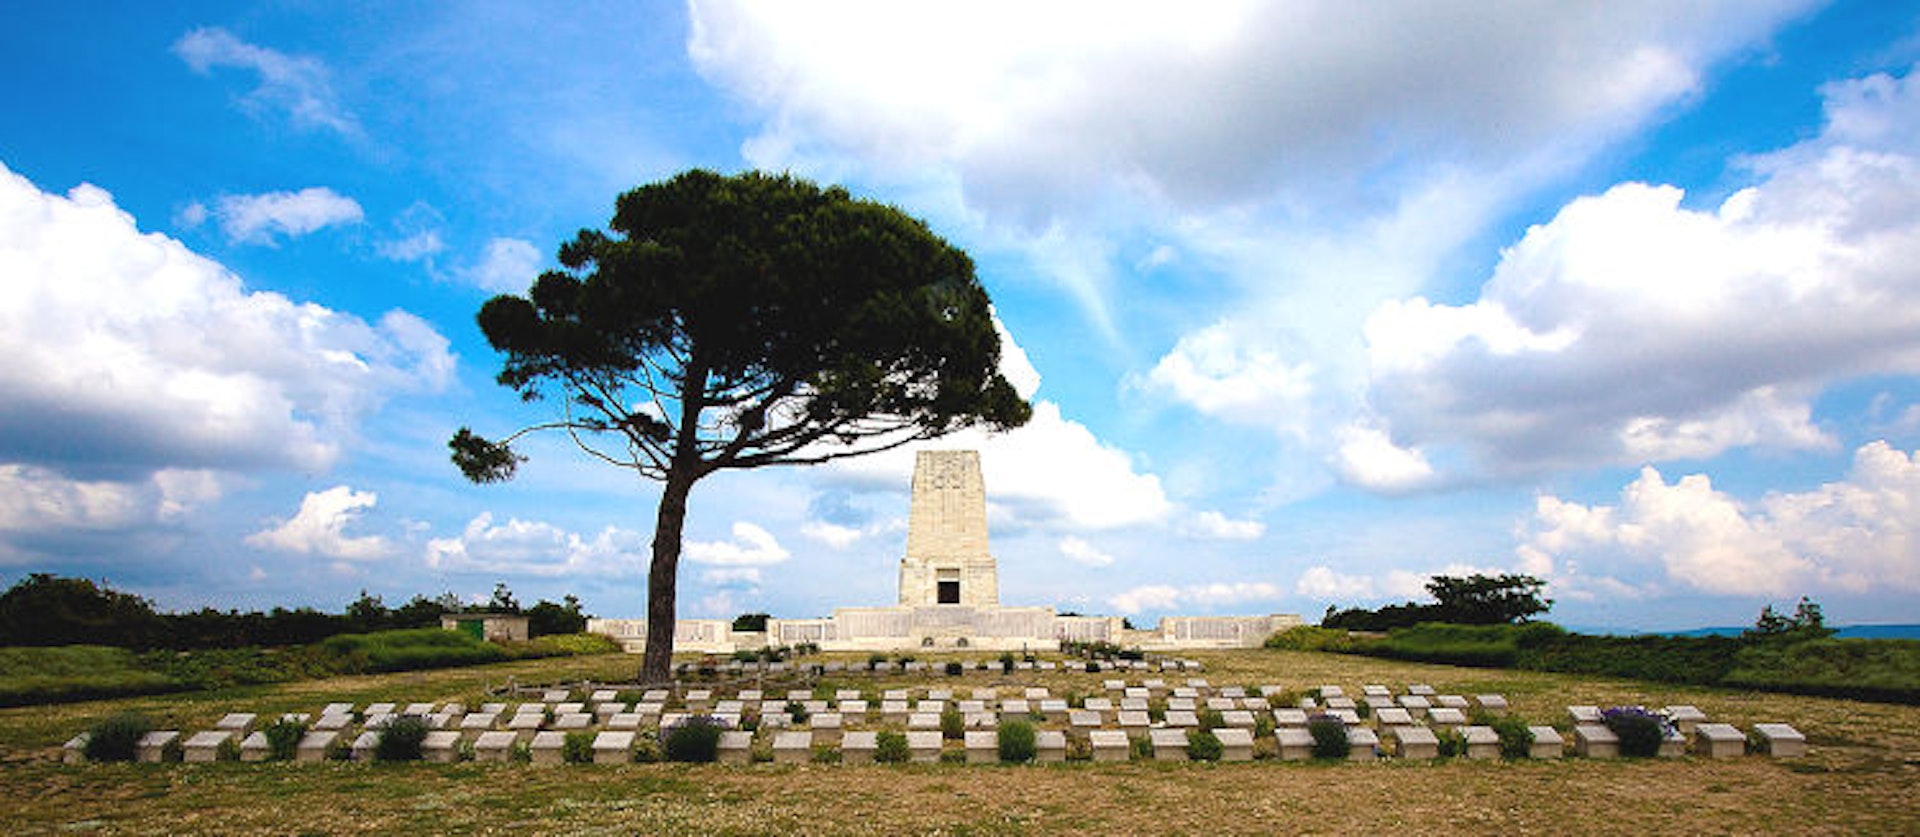 Thousands of men died in the battle for Lone Pine. Image by Esther Lee / CC BY 2.0